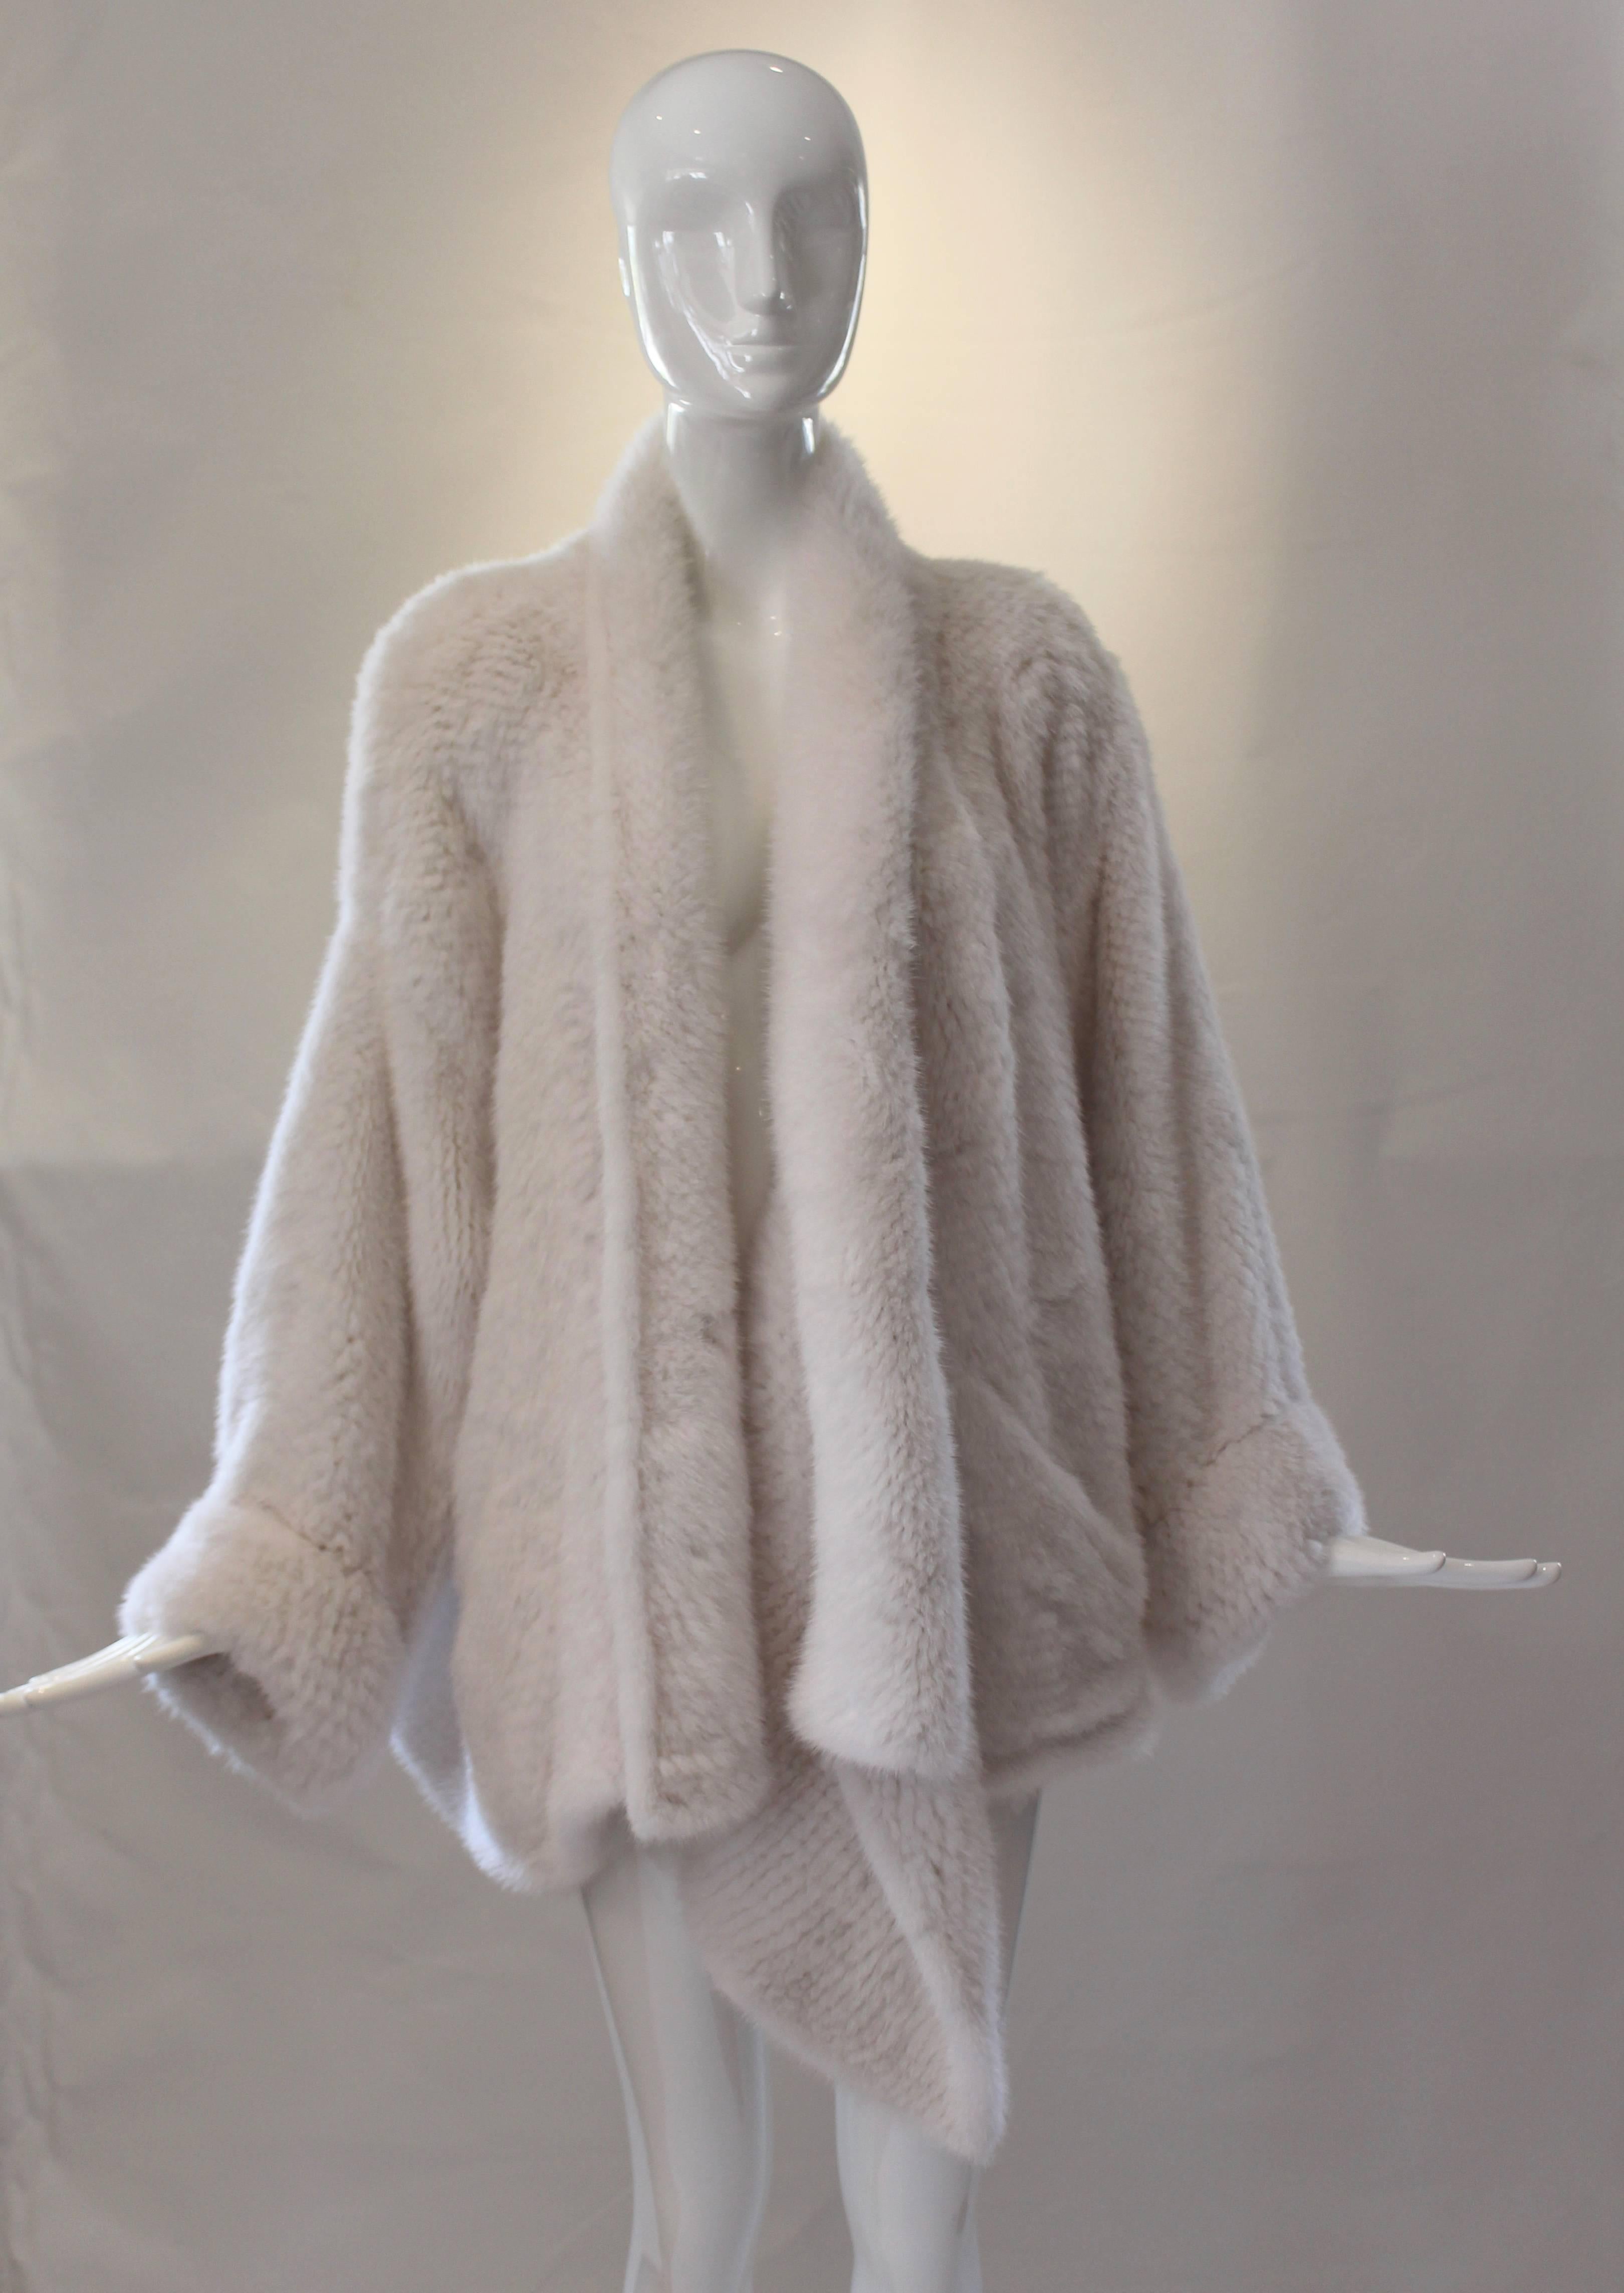 This amazing Dior crochet mink jacket is pristine white.  It's drapey construction adds to its high fashion vibe.  Crossover front to single button if you wish or leave open and drapey.  It is super soft and luxe.  Quite a rare find.